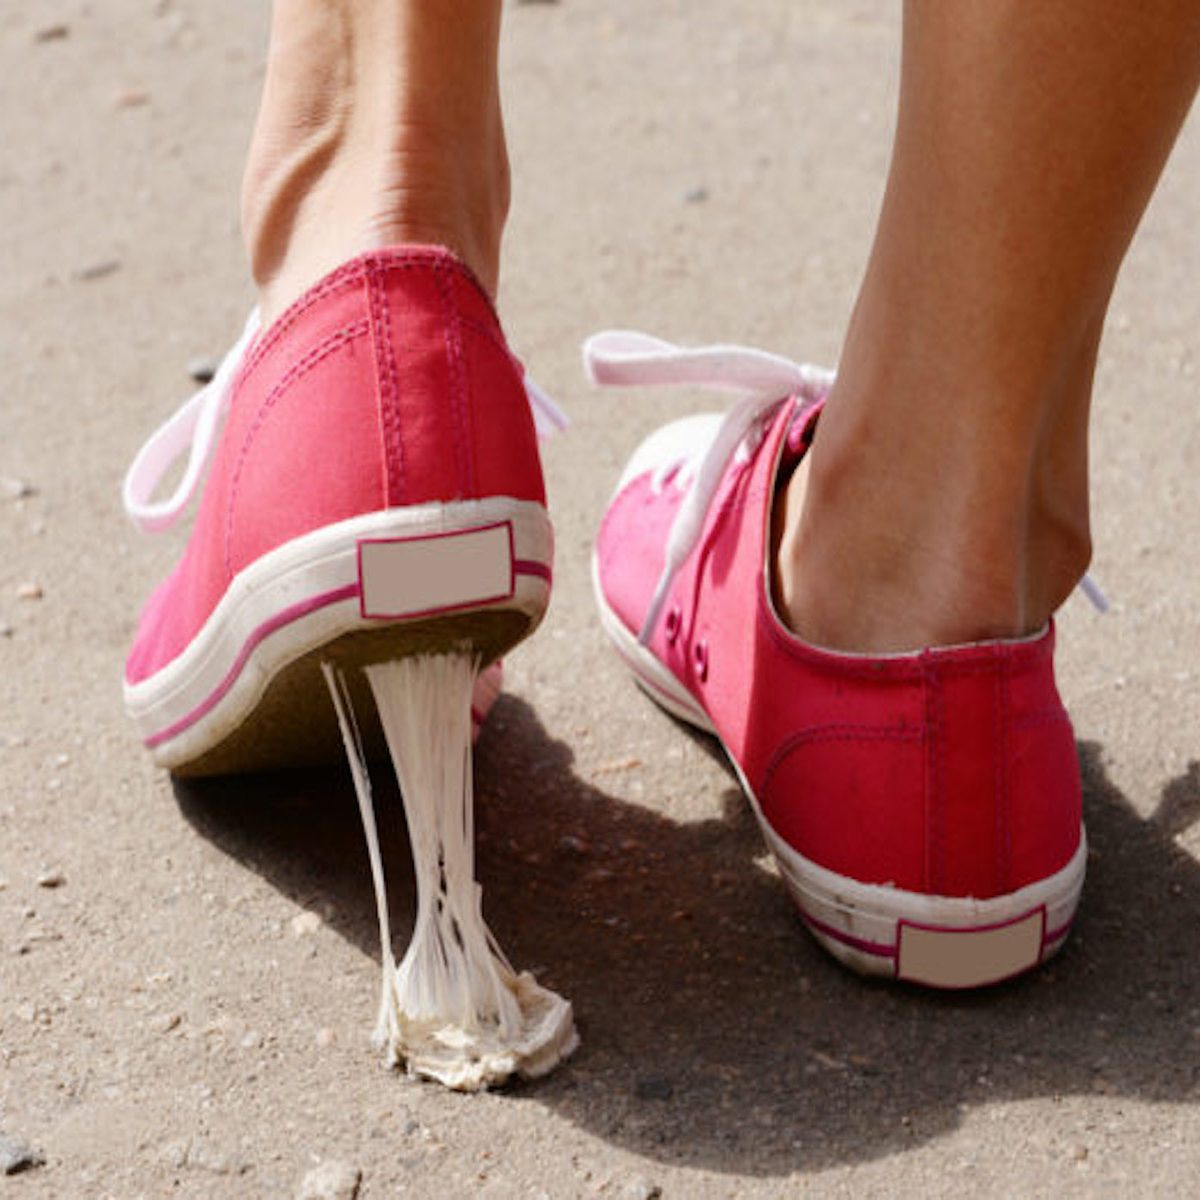 how to remove gum from the bottom of your shoe